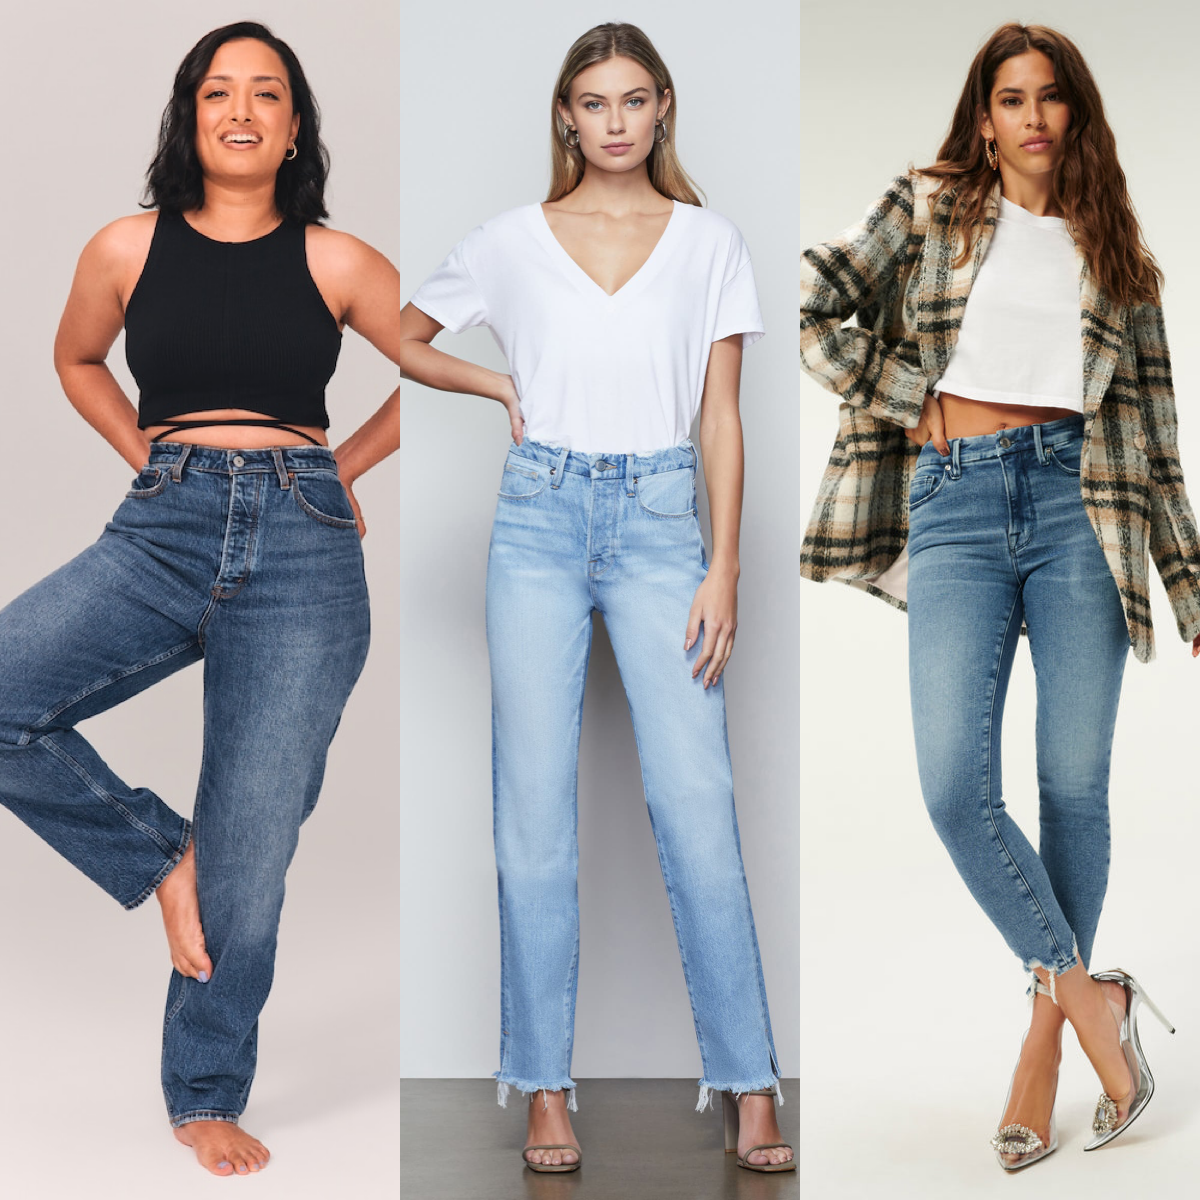 American Women Ditch Skinny Jeans After Decades-Long Love Affair